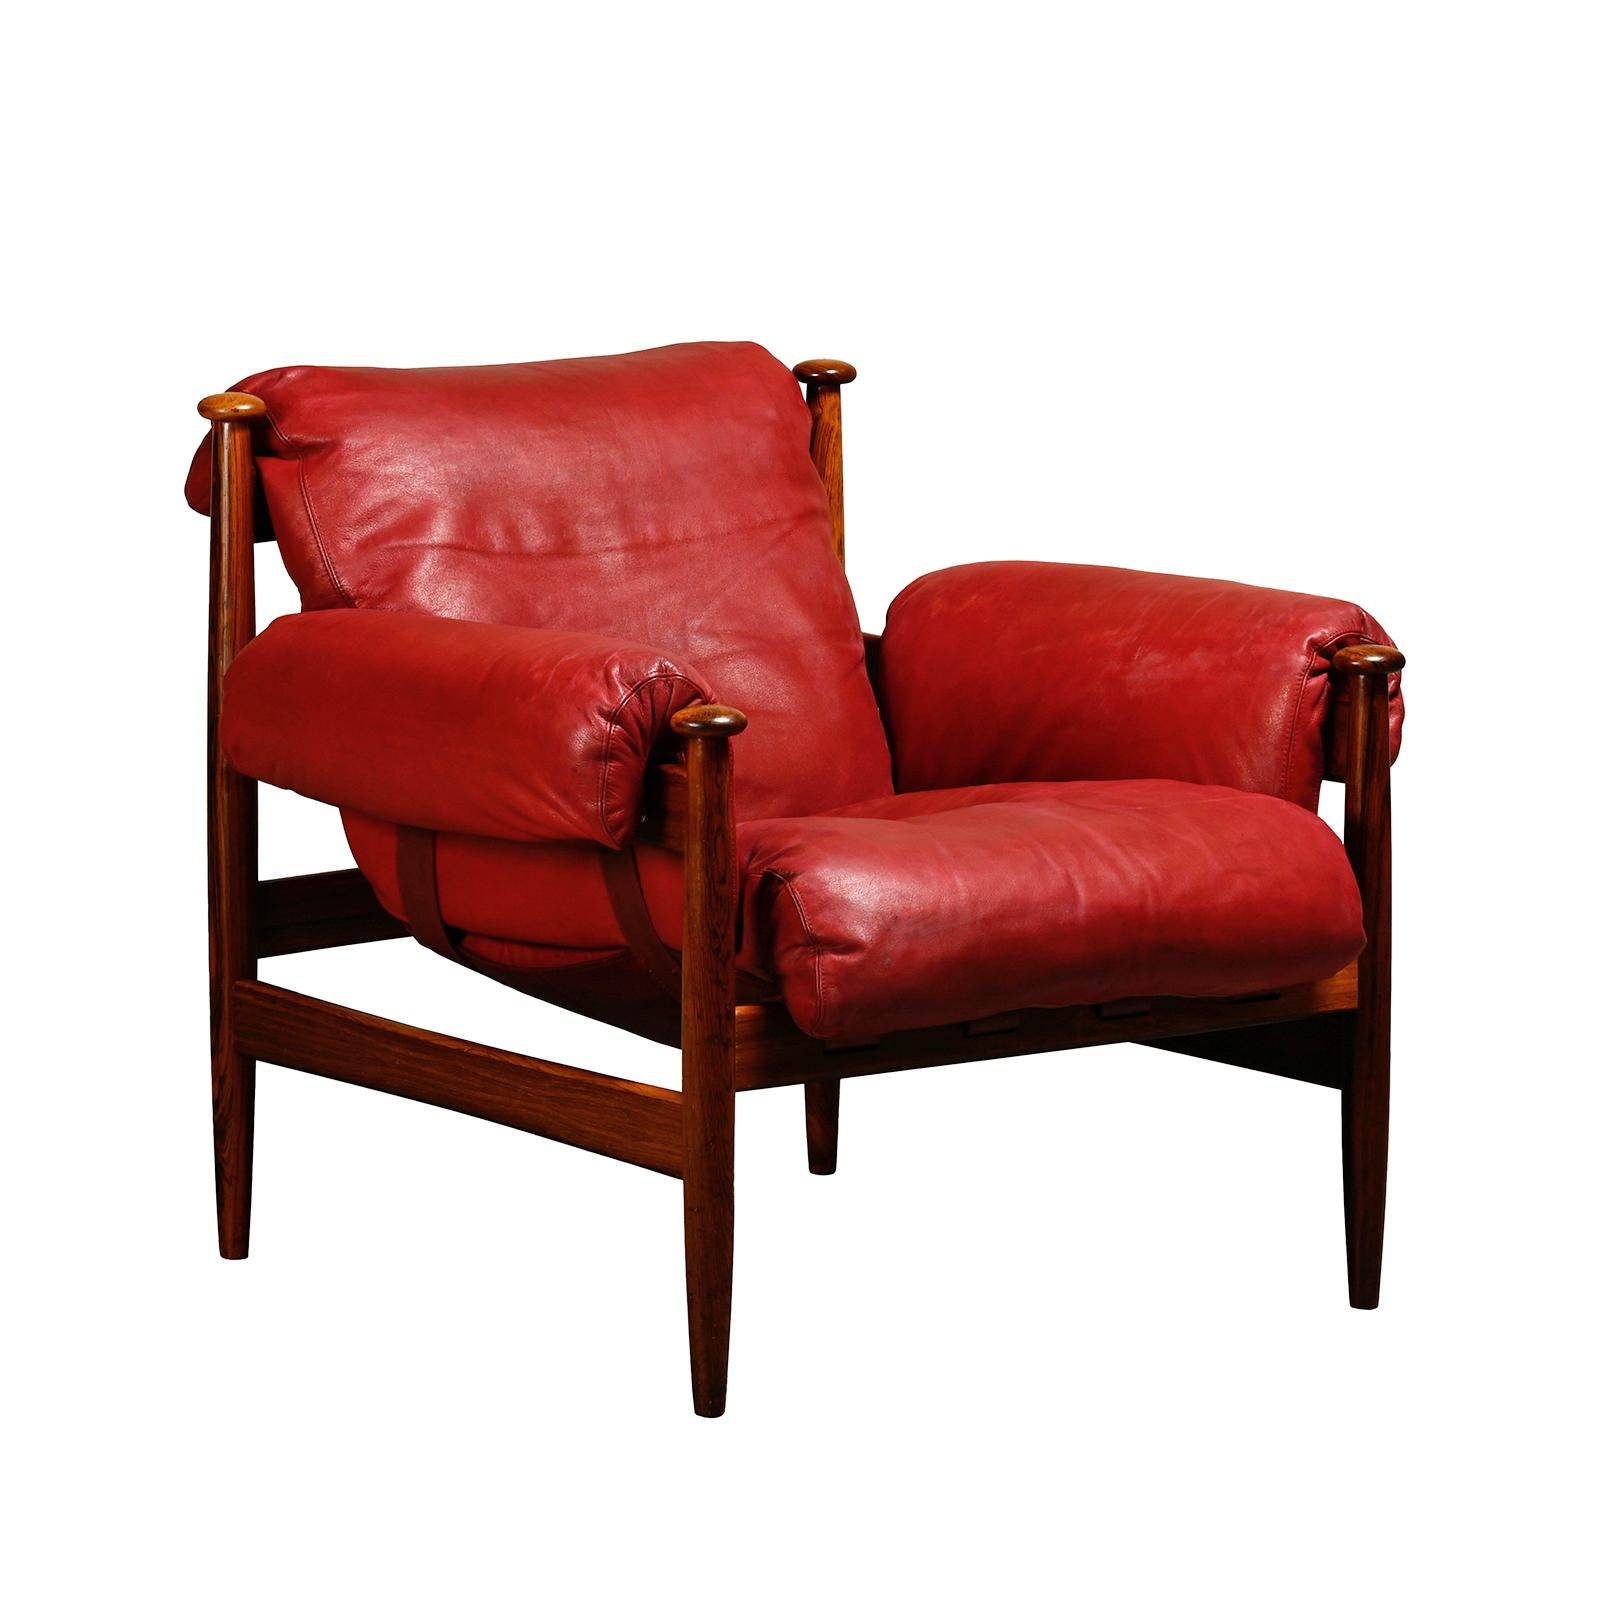 Eric Merthen Amiral Lounge Chair in dark wood and red leather for IRE Möbler